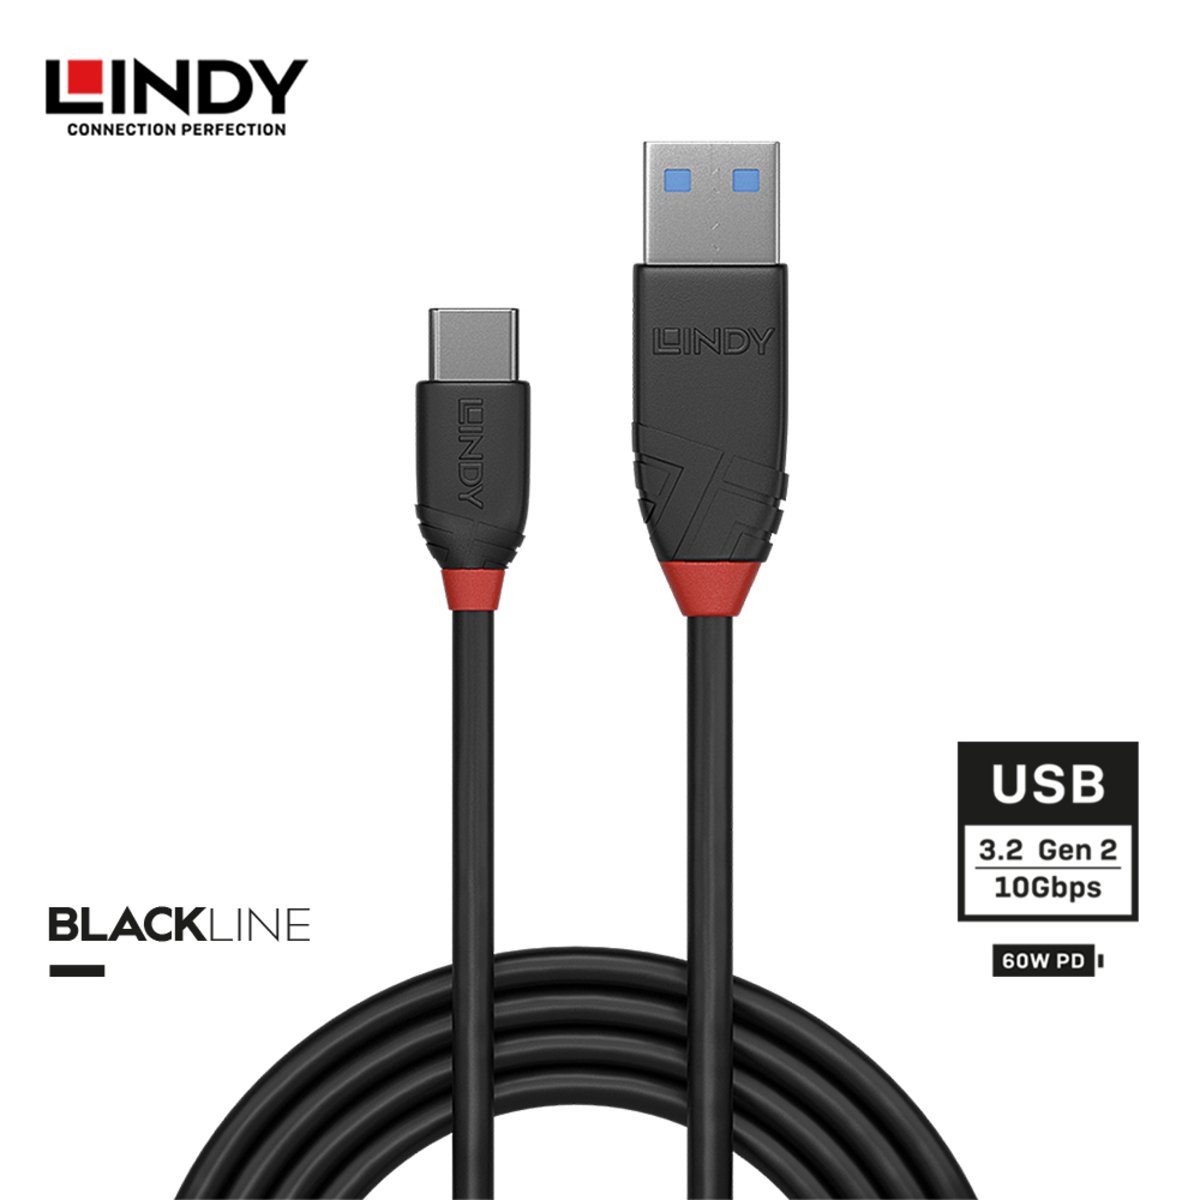 Lindy USB 3.1 Cable Type-C to A 3A 1.5m